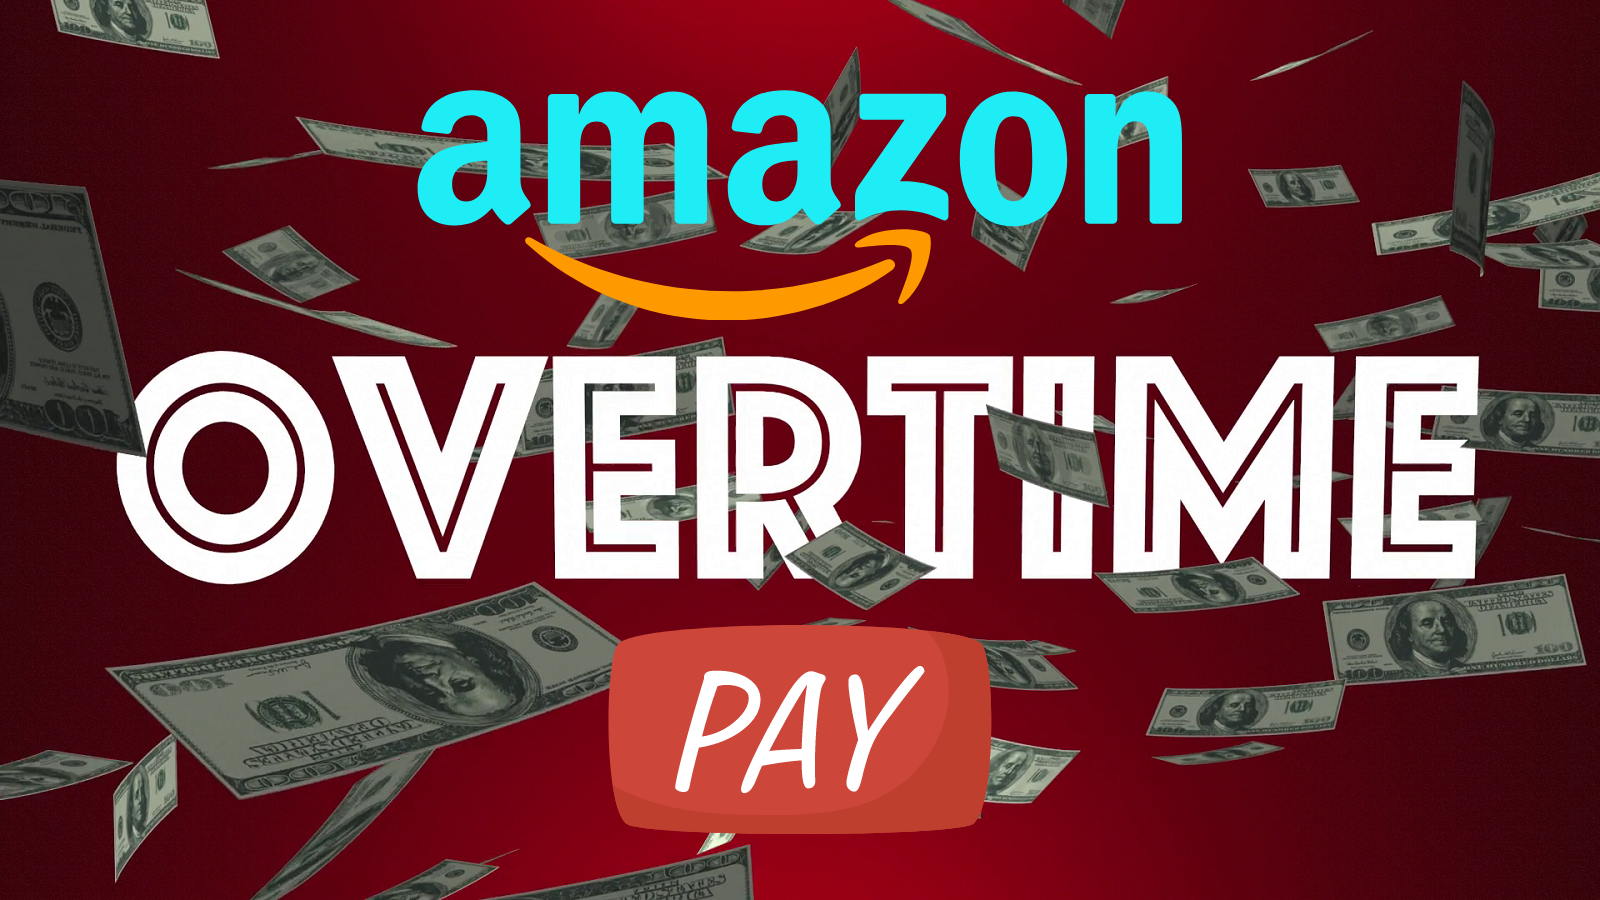 Amazon Overtime Pay in 2022: What You Need to Know